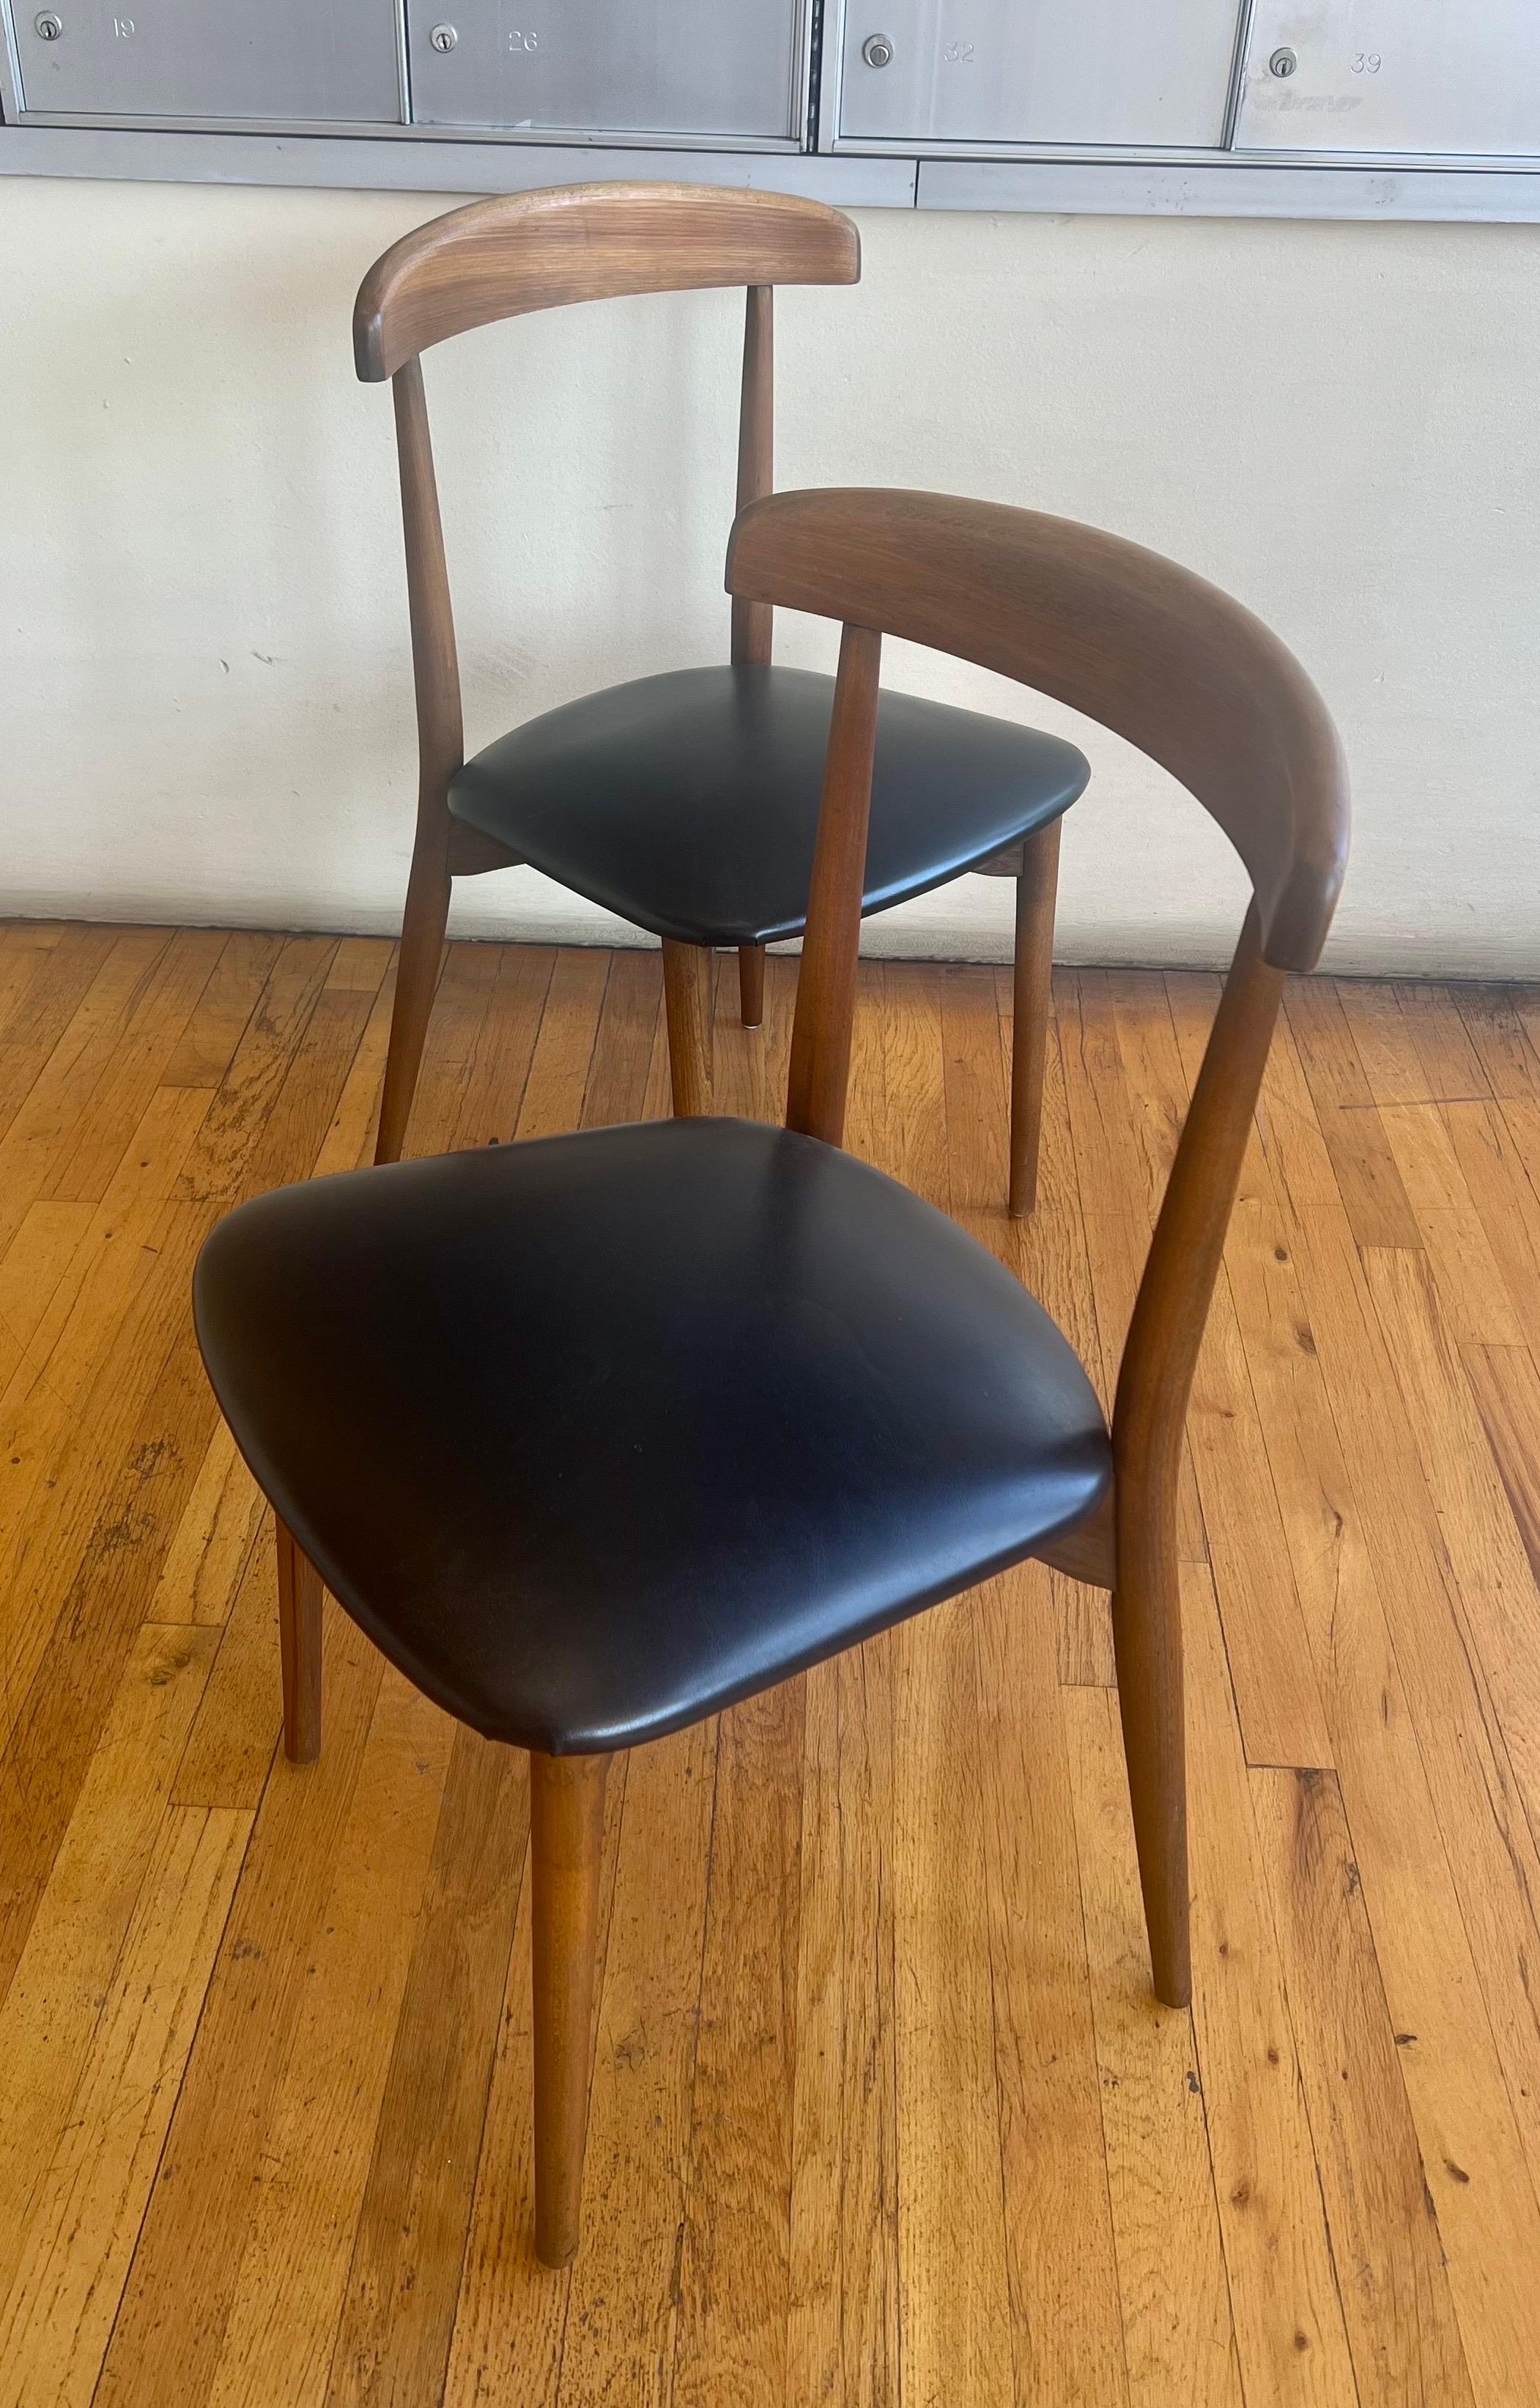 American Mid century Modern Walnut Desk/Dining Chairs 3 Available For Sale 3